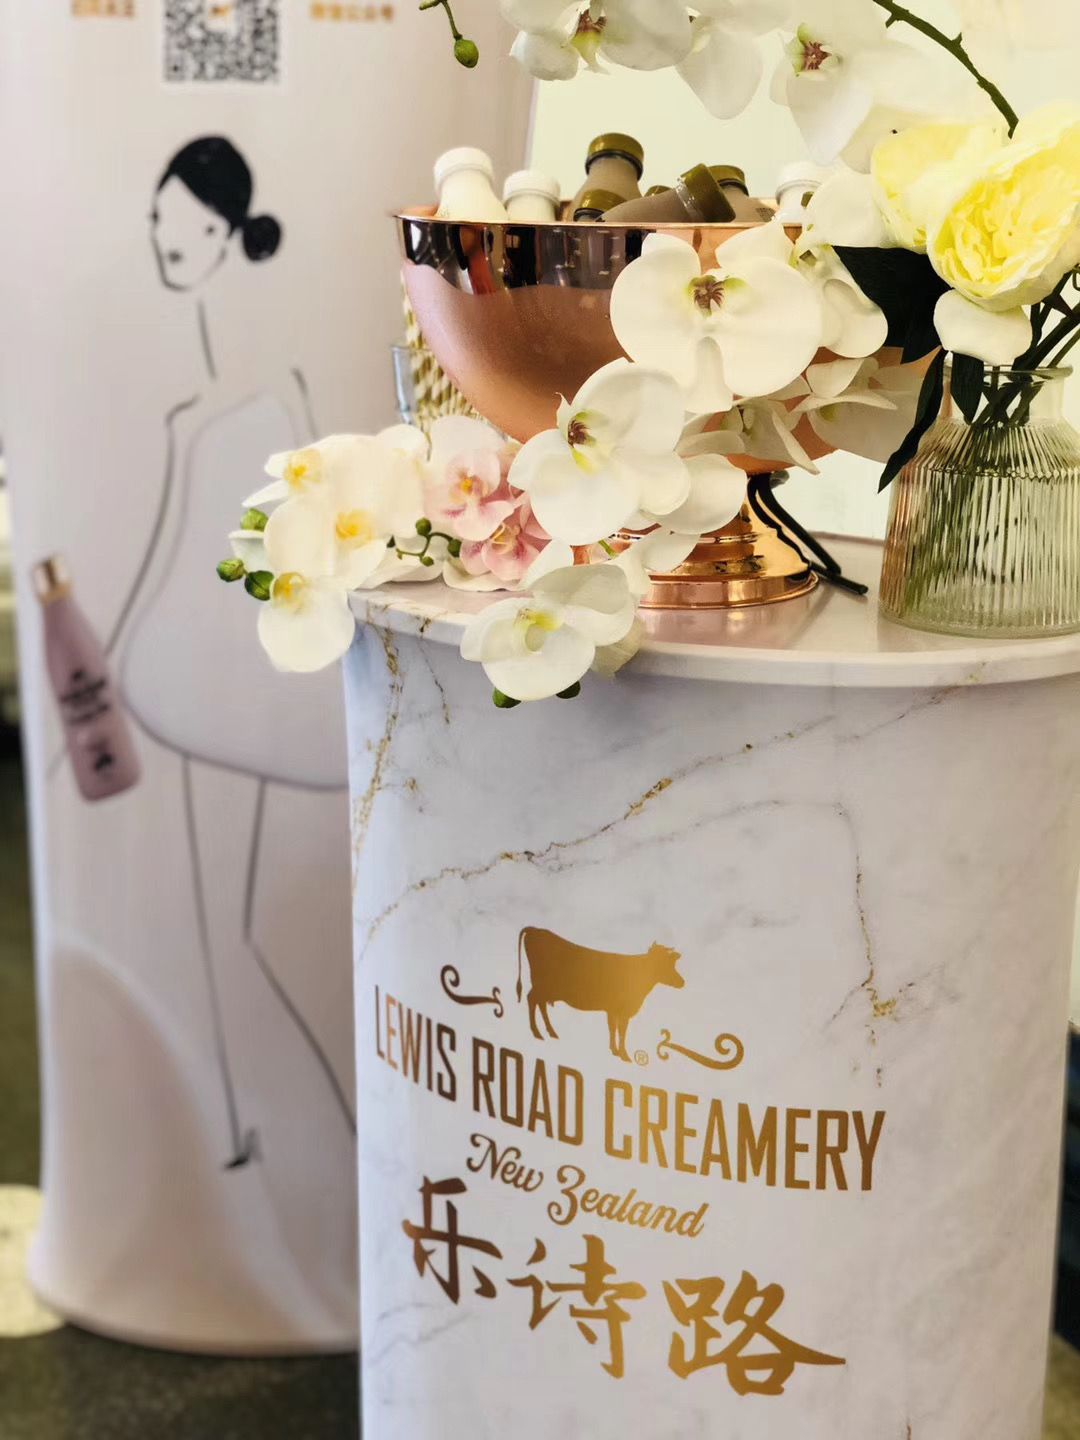 Lewis Road Creamery’s China Launch